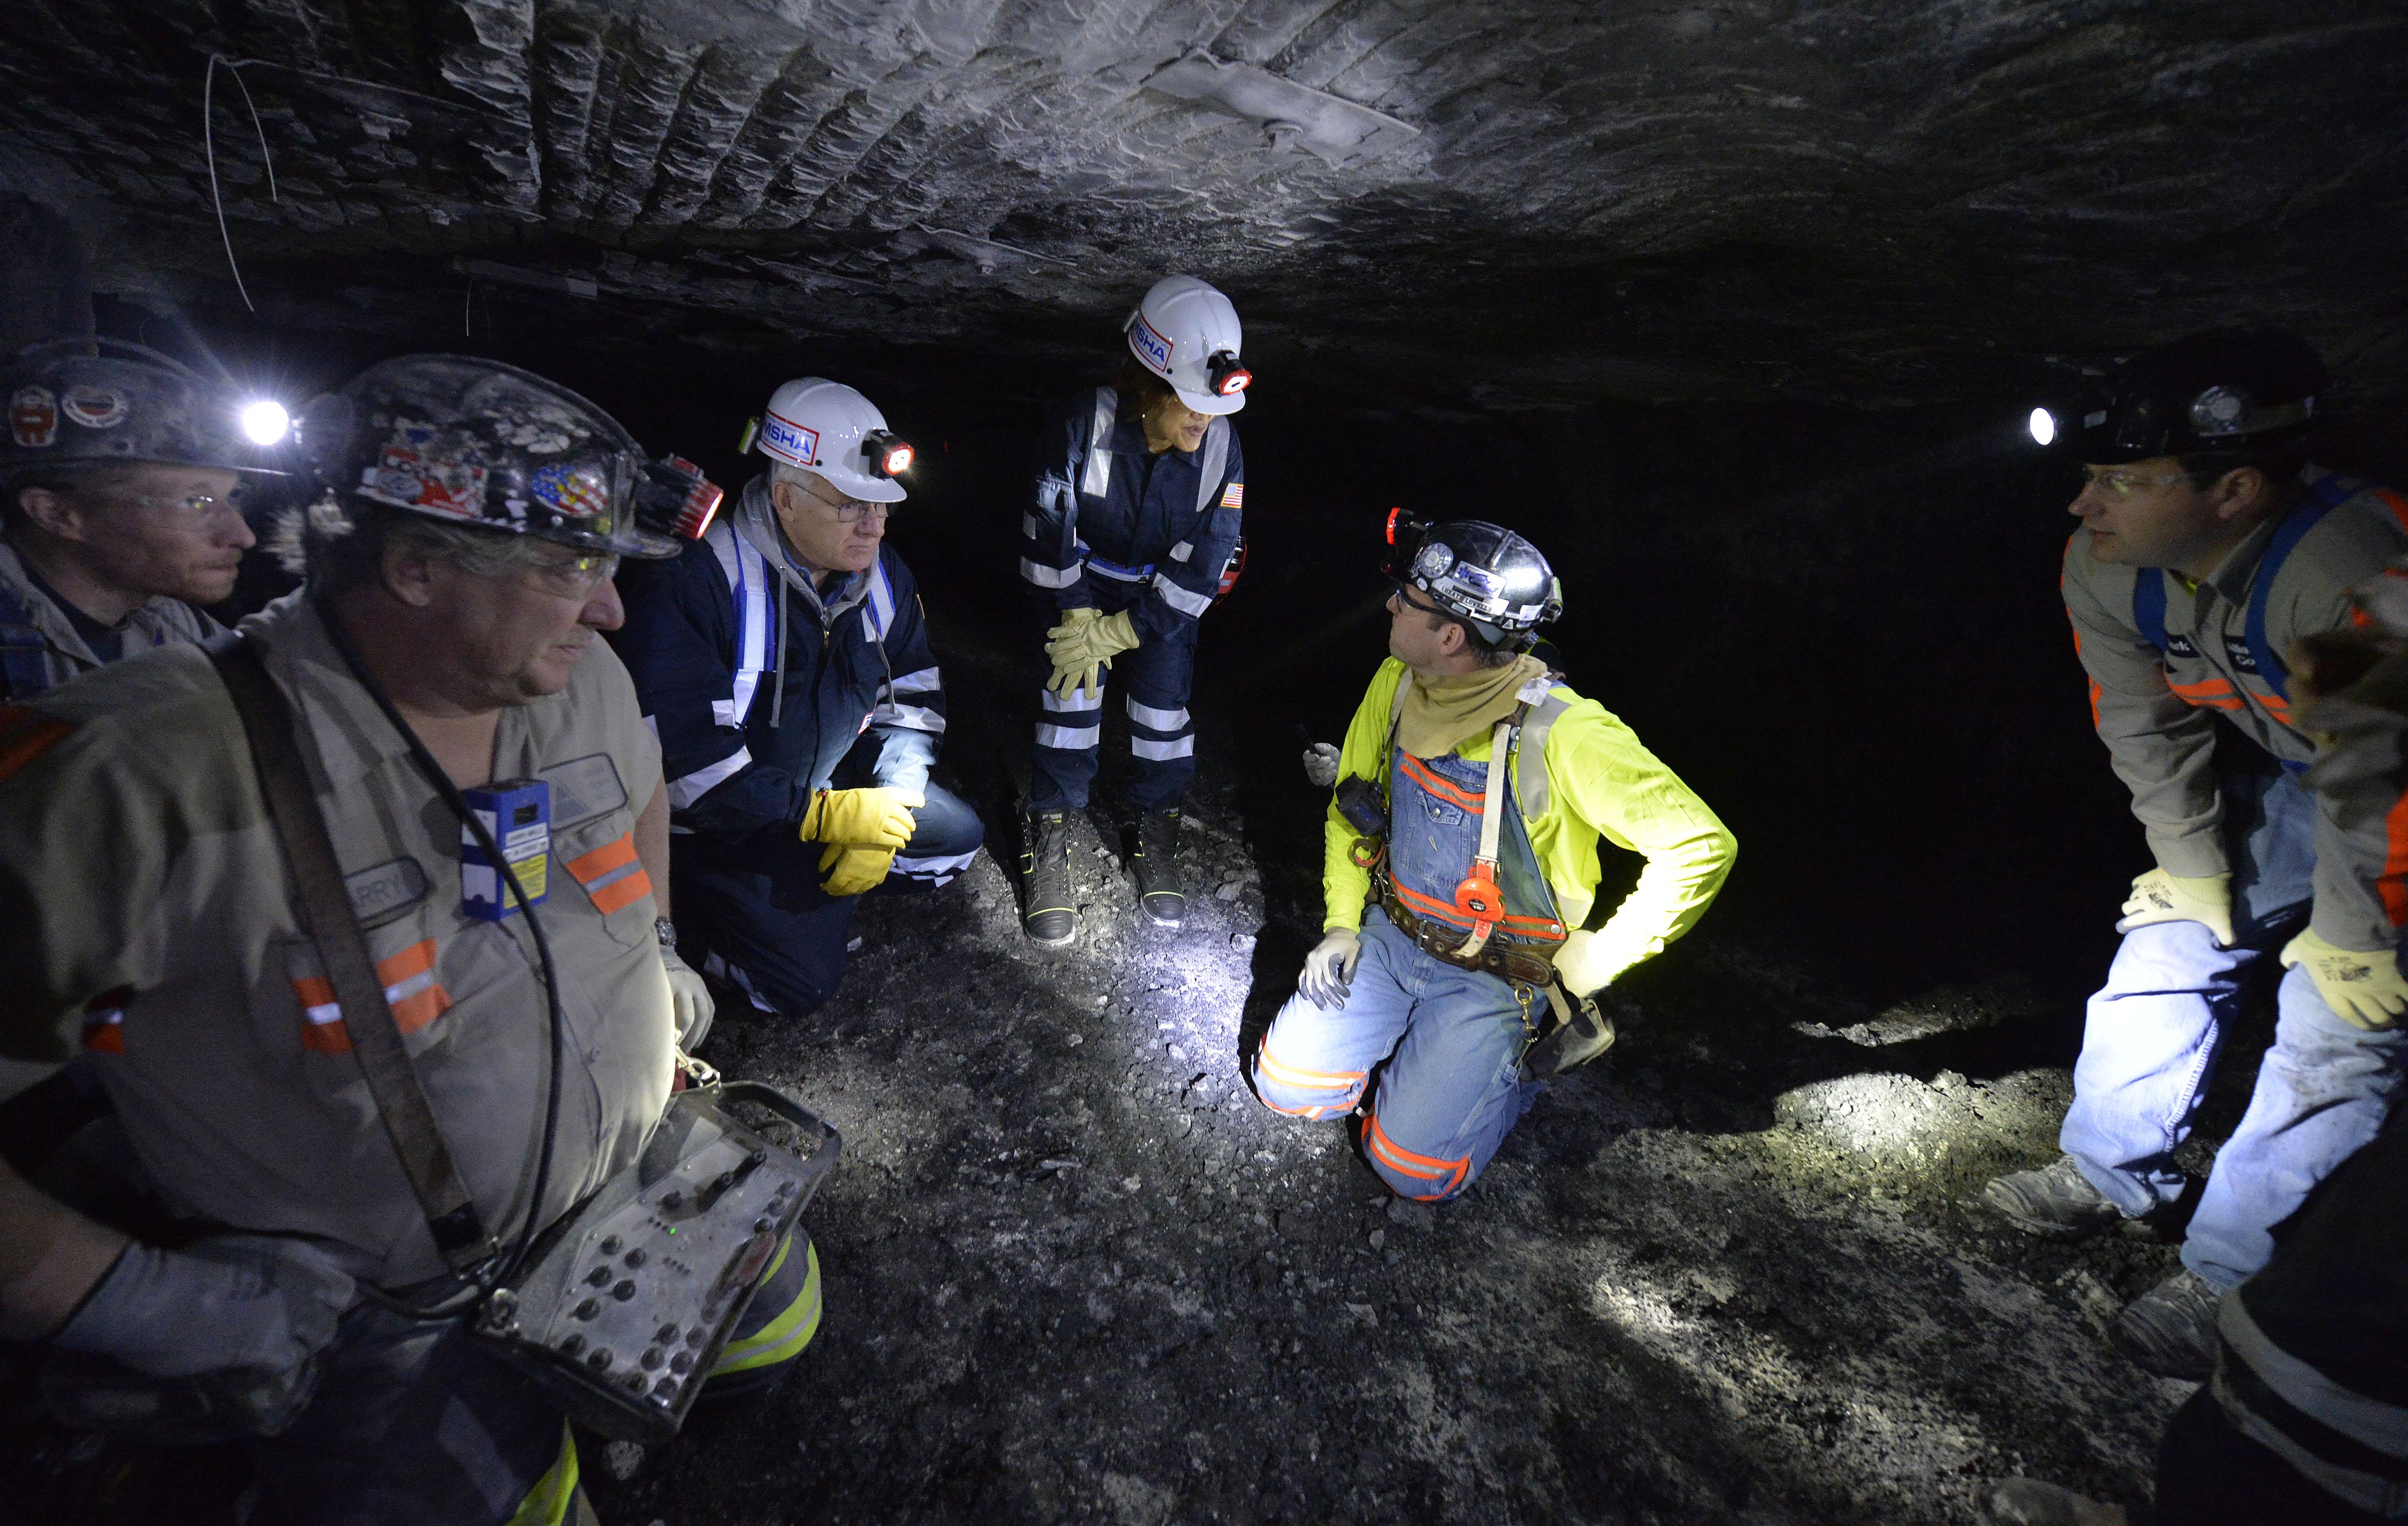 5 things to know about underground coal mining - Washington Times